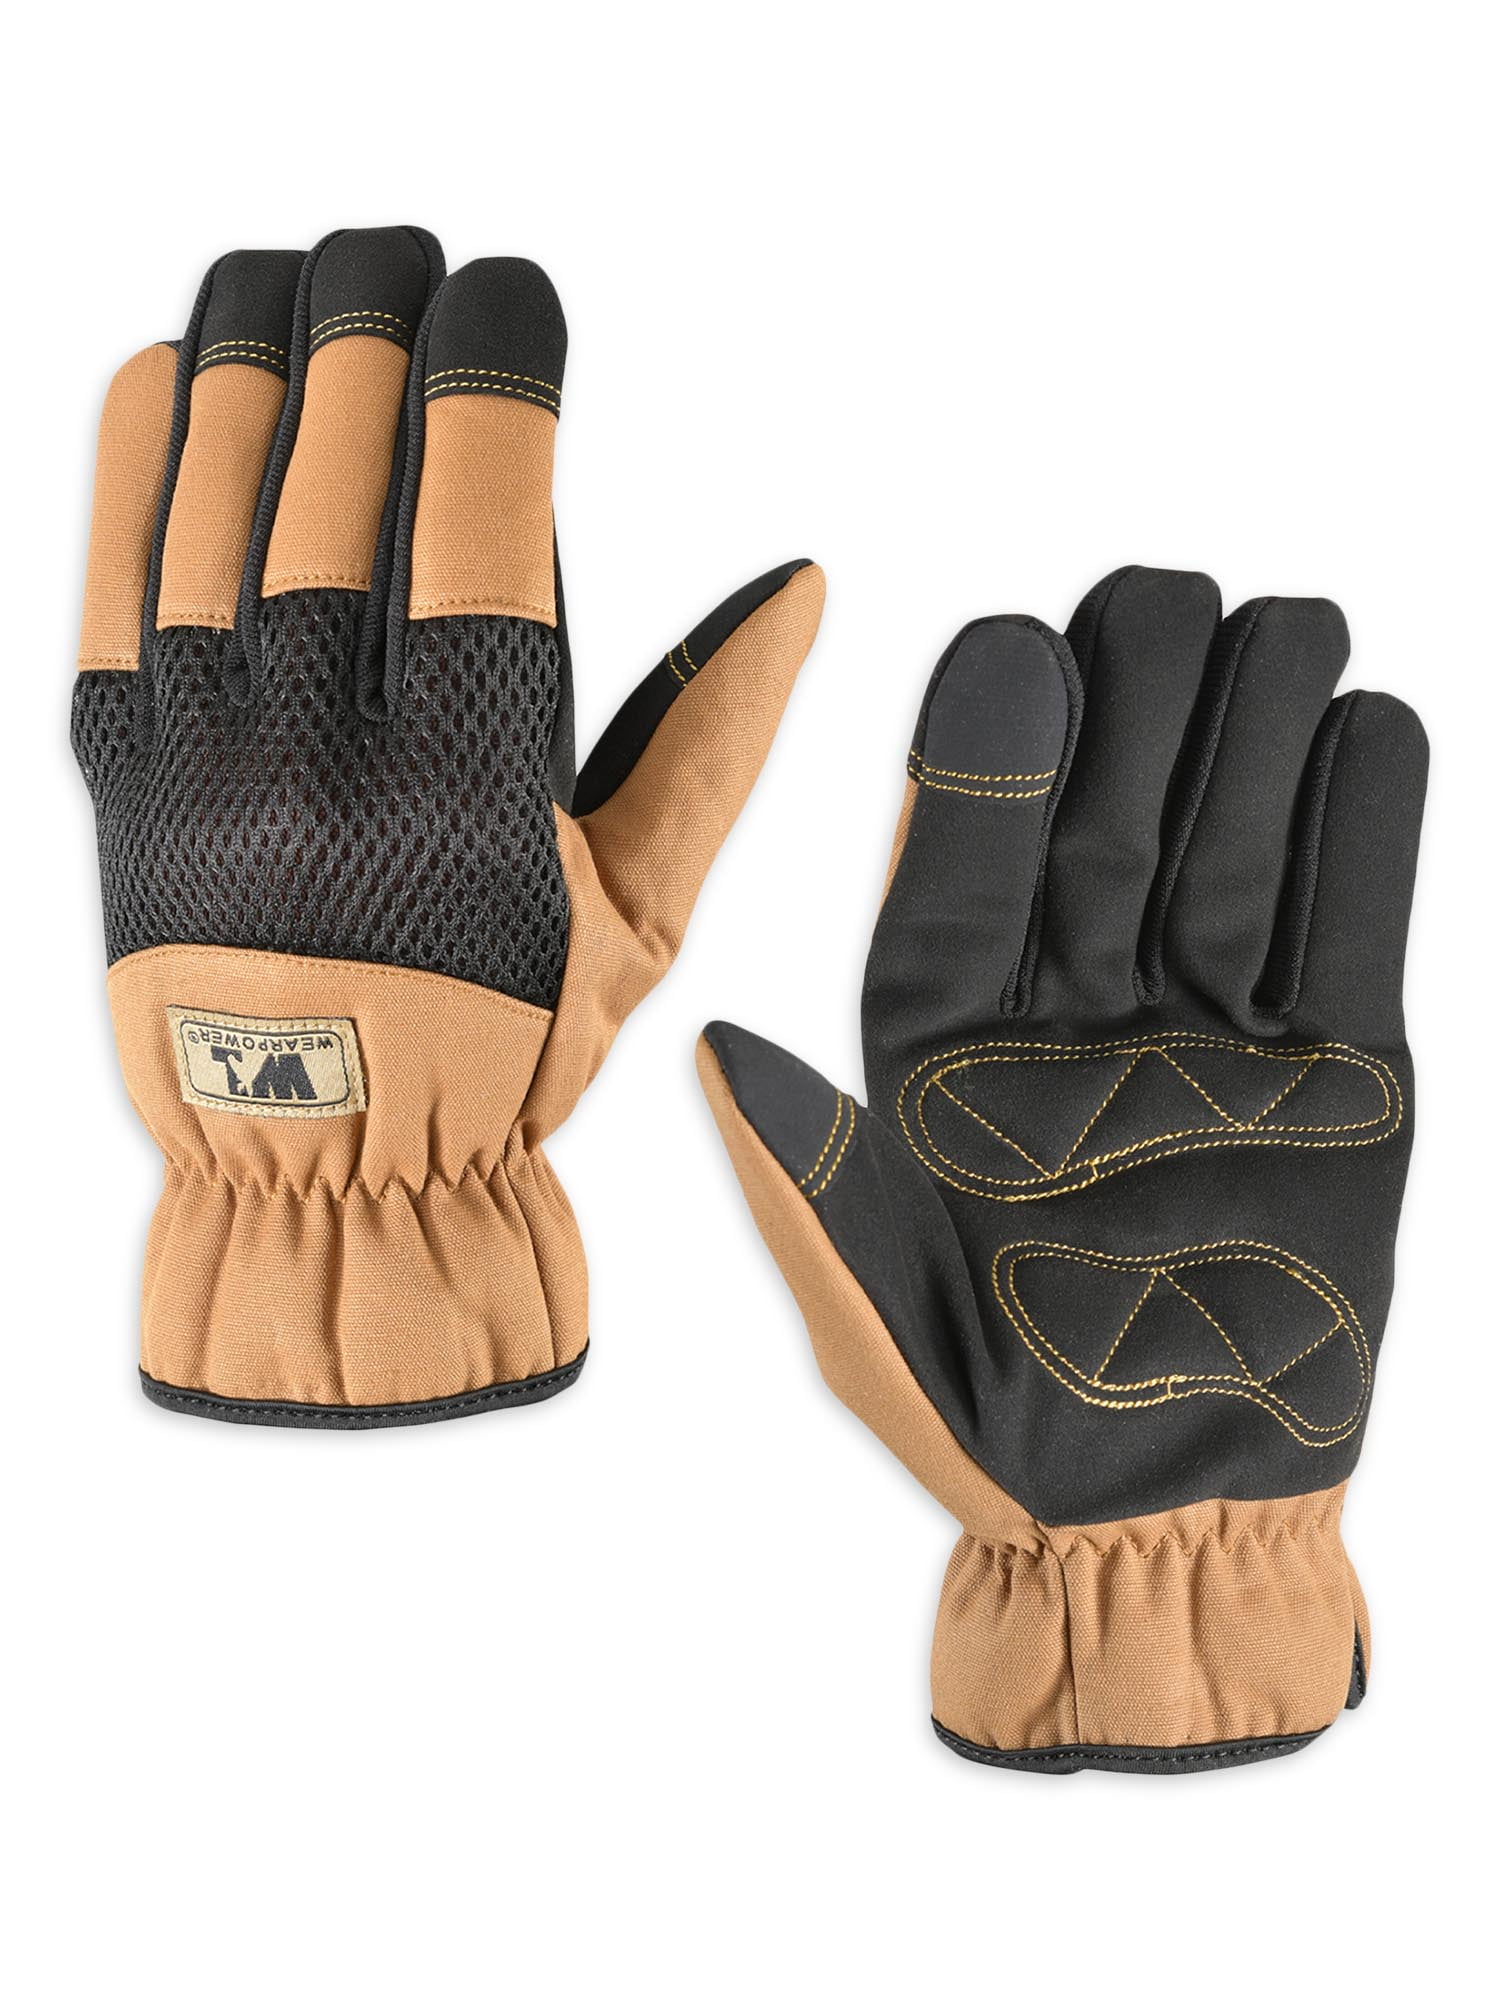 Wells Lamont Mens Lined Duck Synthetic Leather Gloves